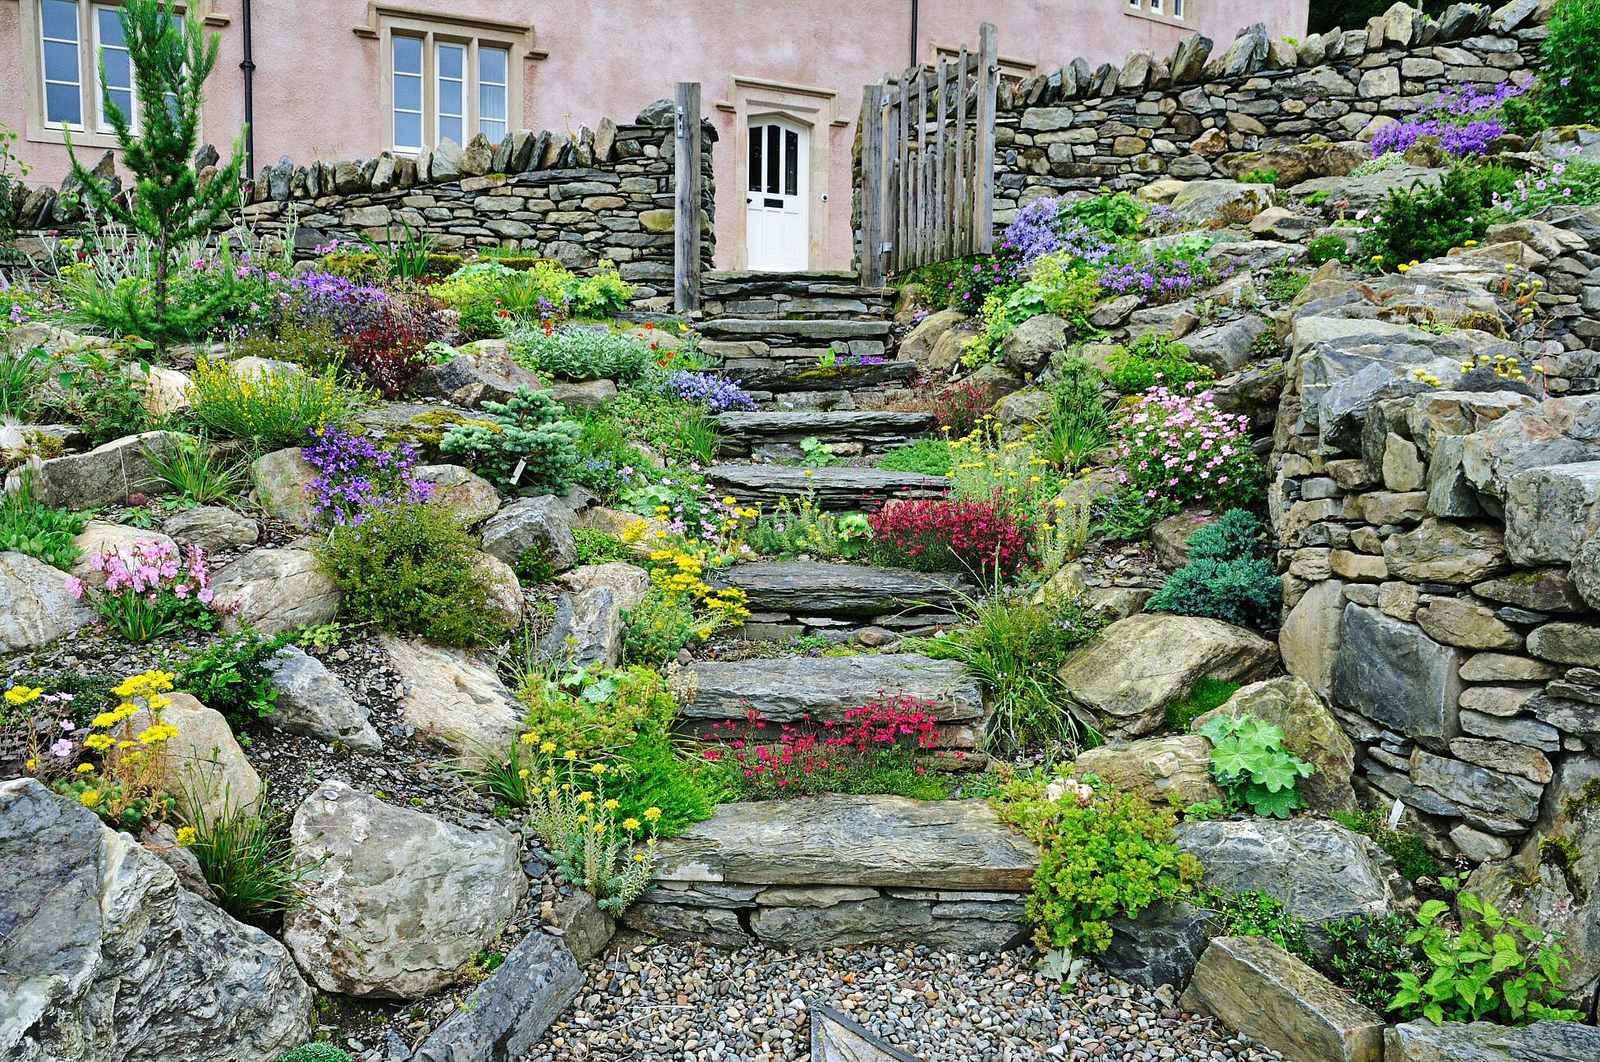 Amping up your walkways to boost your yard's curb appeal